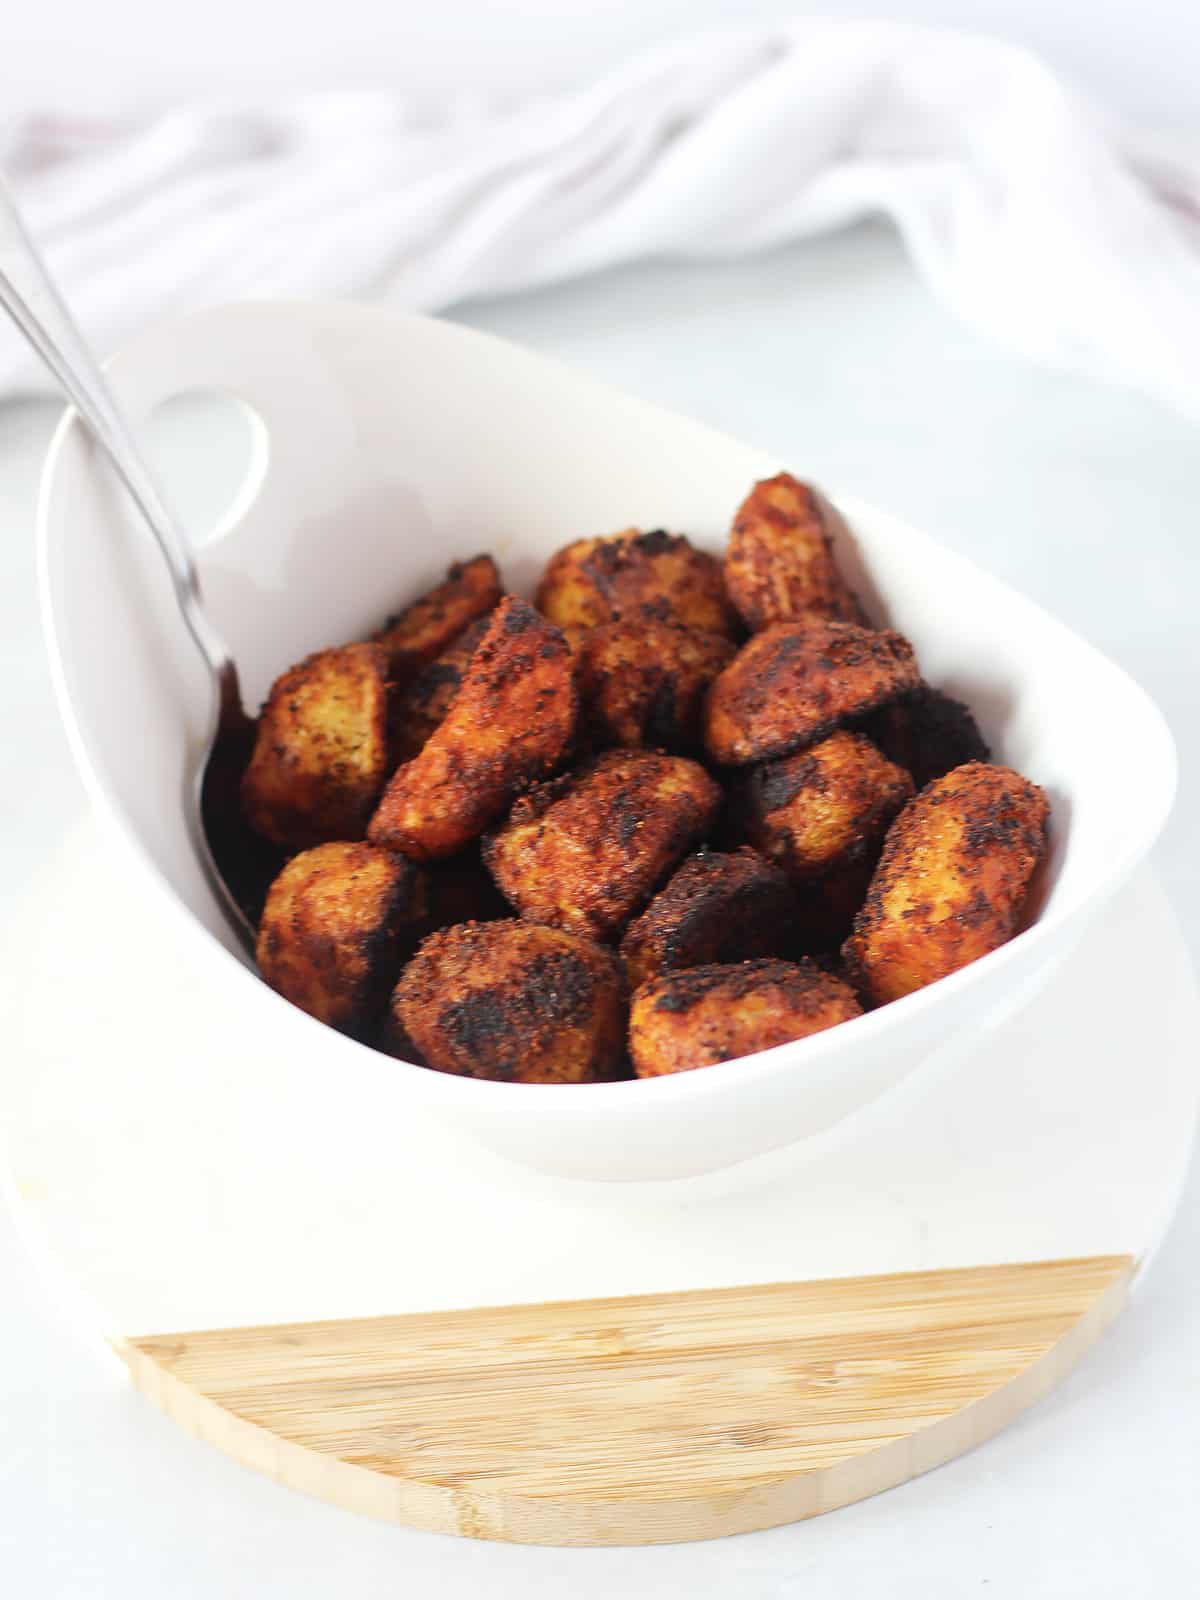 Paprika roasted potatoes in a bowl with a serving spoon.